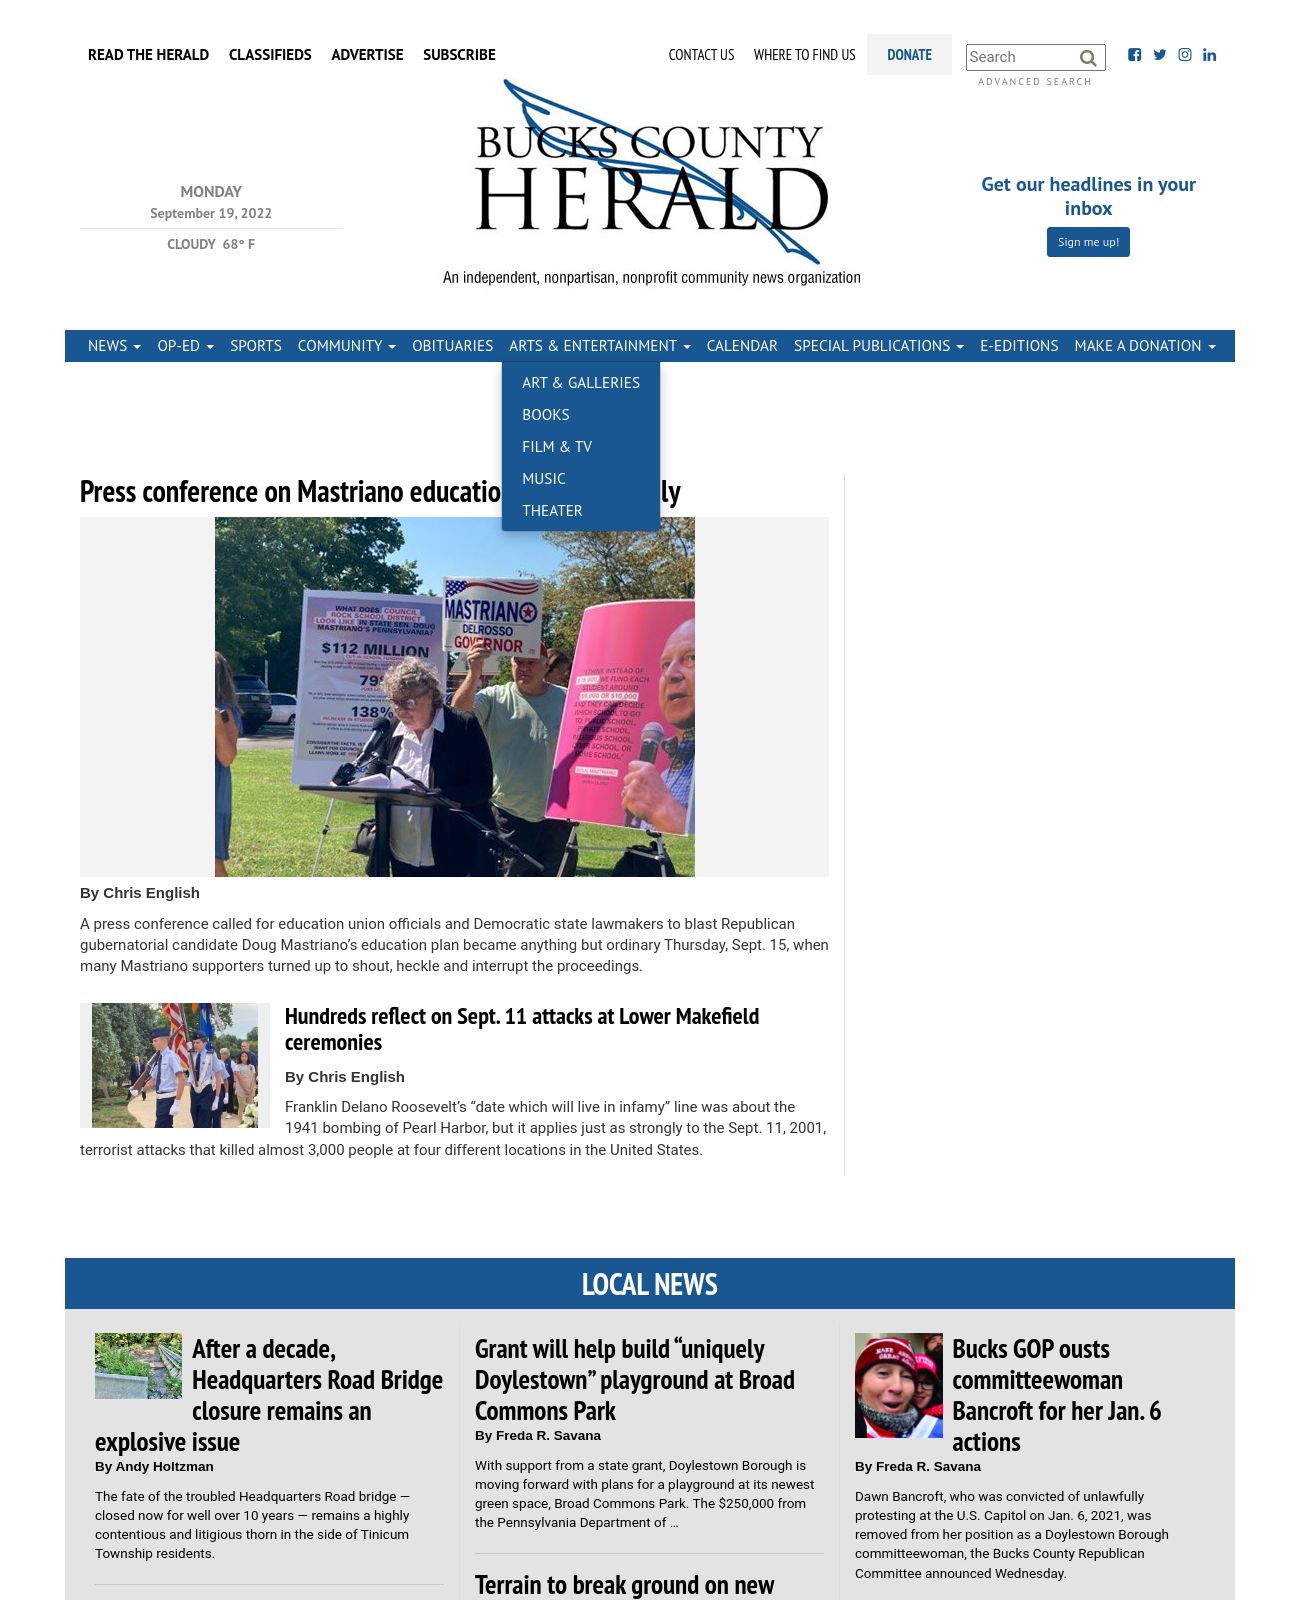 Bucks County Herald at 2022-09-19 06:49:07-04:00 local time